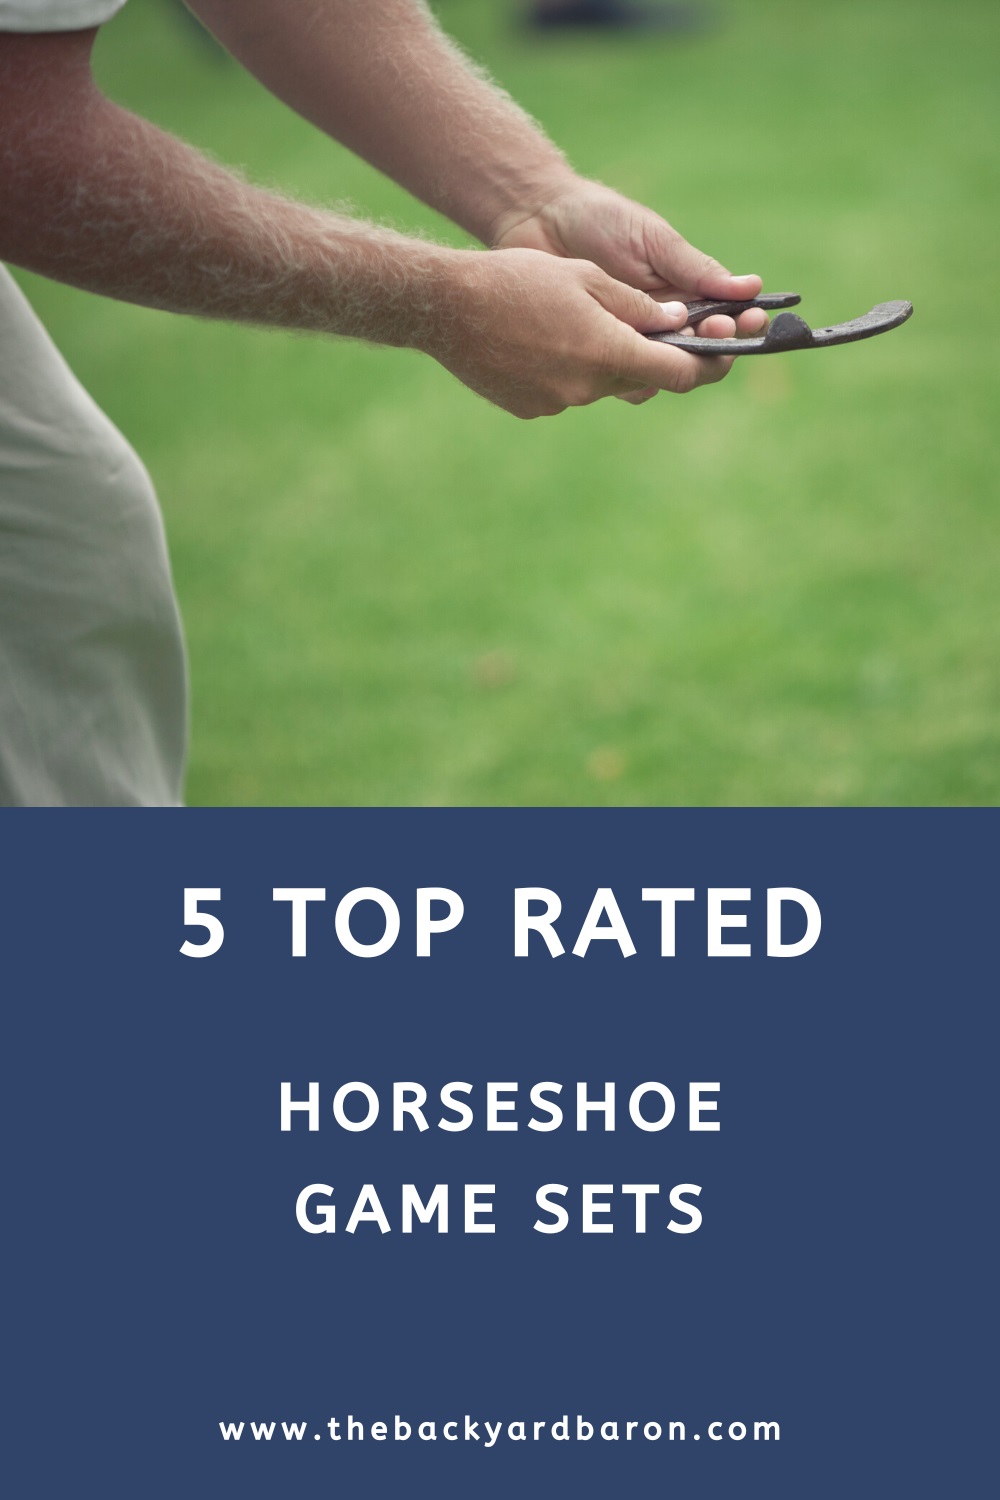 5 Top rated horseshoe sets